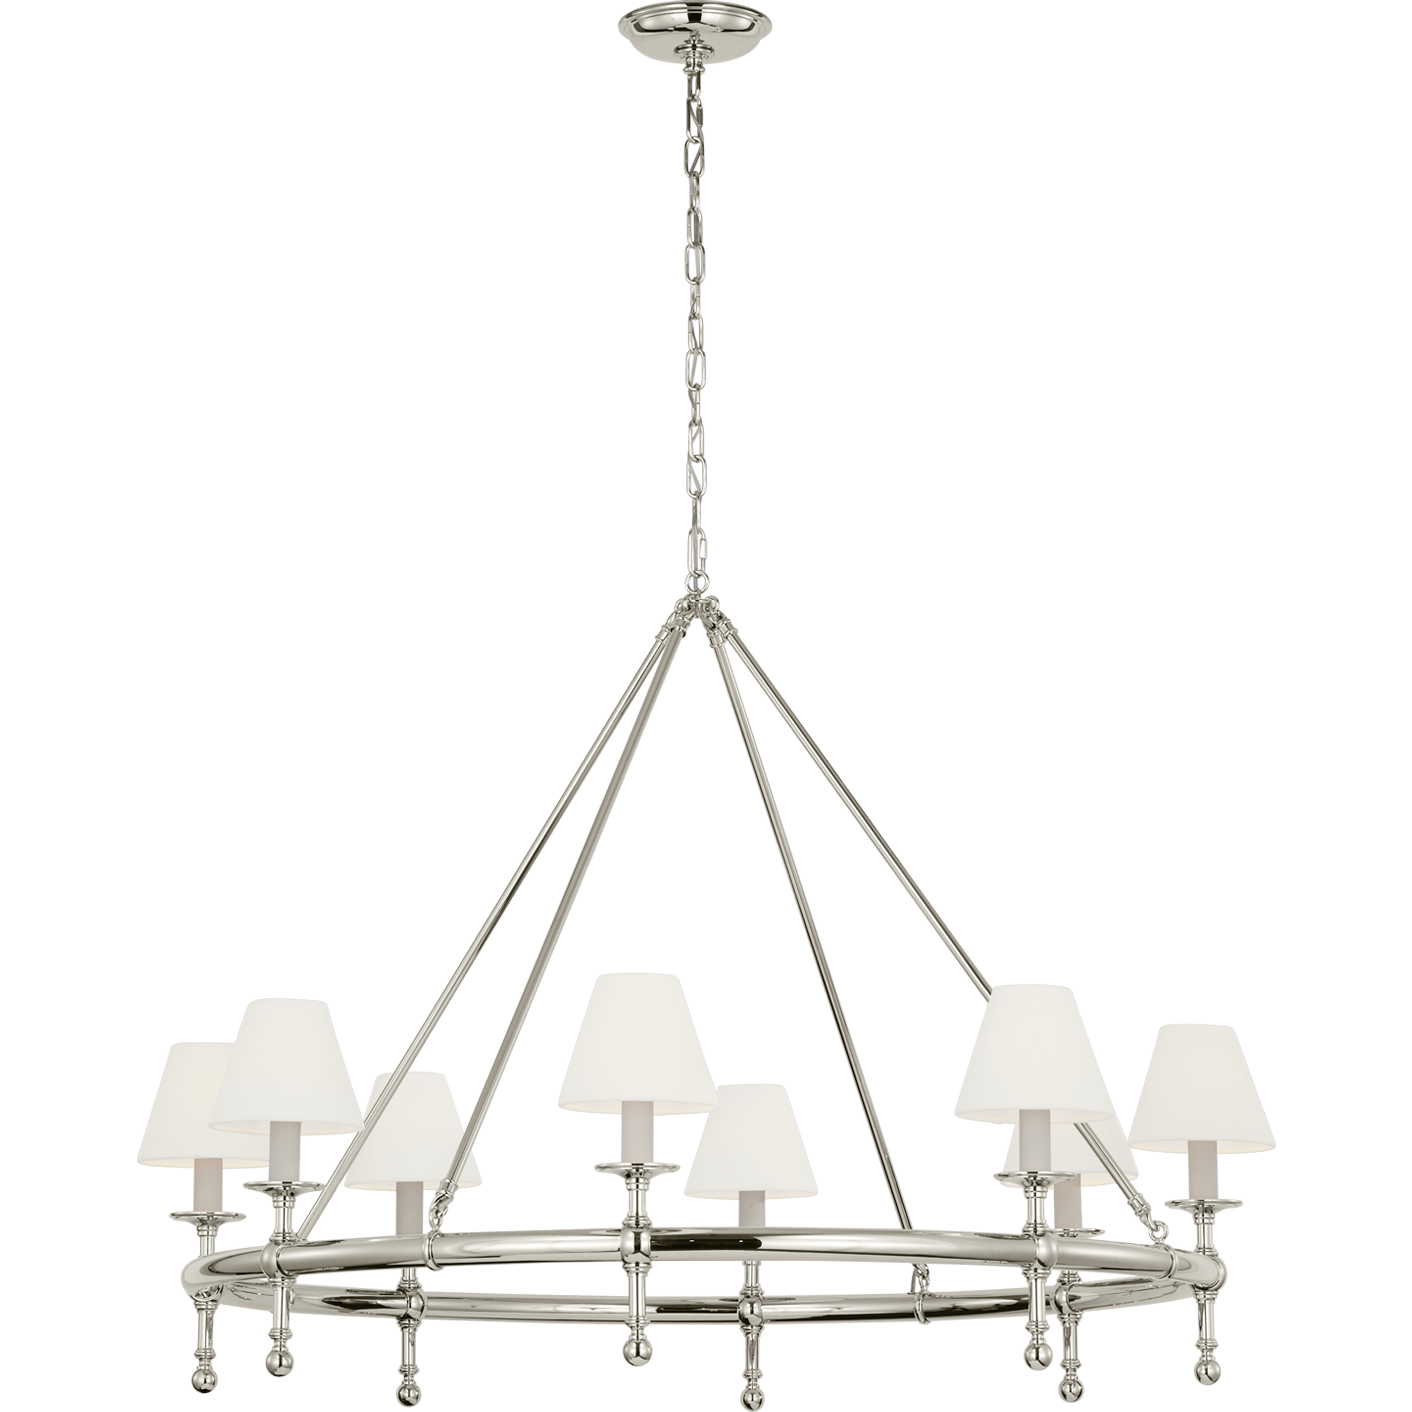 Classic 42" Ring Chandelier with Linen Shades